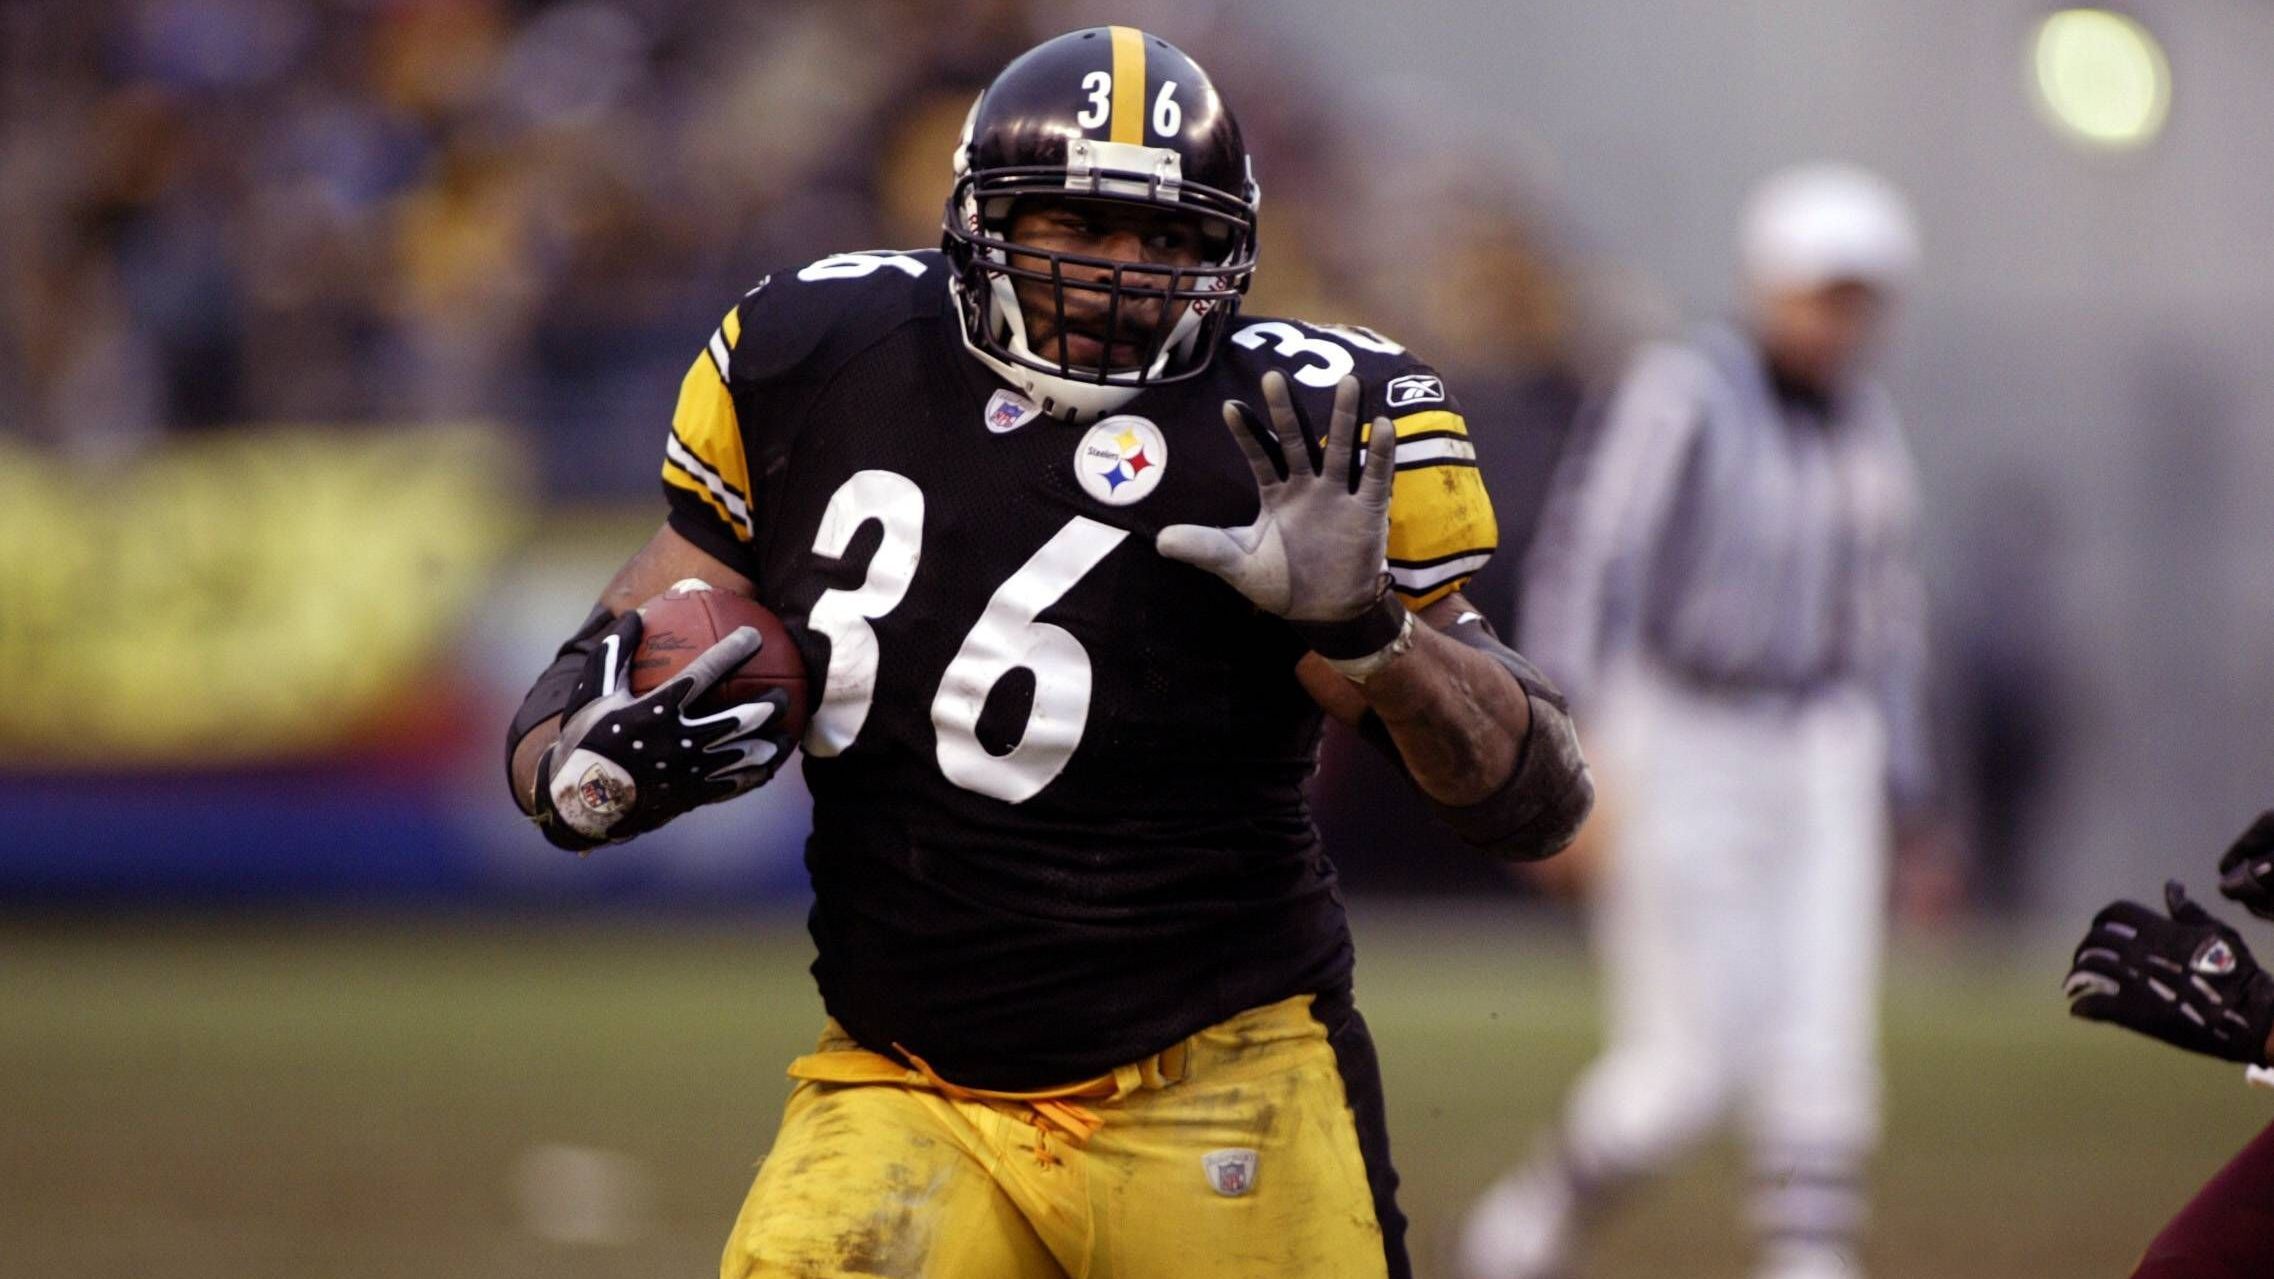 <strong>36: Jerome Bettis</strong><br>Teams: Los Angeles/St. Louis Rams, Pittsburgh Steelers<br>Position: Running Back<br>Erfolge: Pro Football Hall of Famer, Super-Bowl-Champion 2006, sechsmaliger Pro Bowler<br>Honorable Mentions: LeRoy Butler